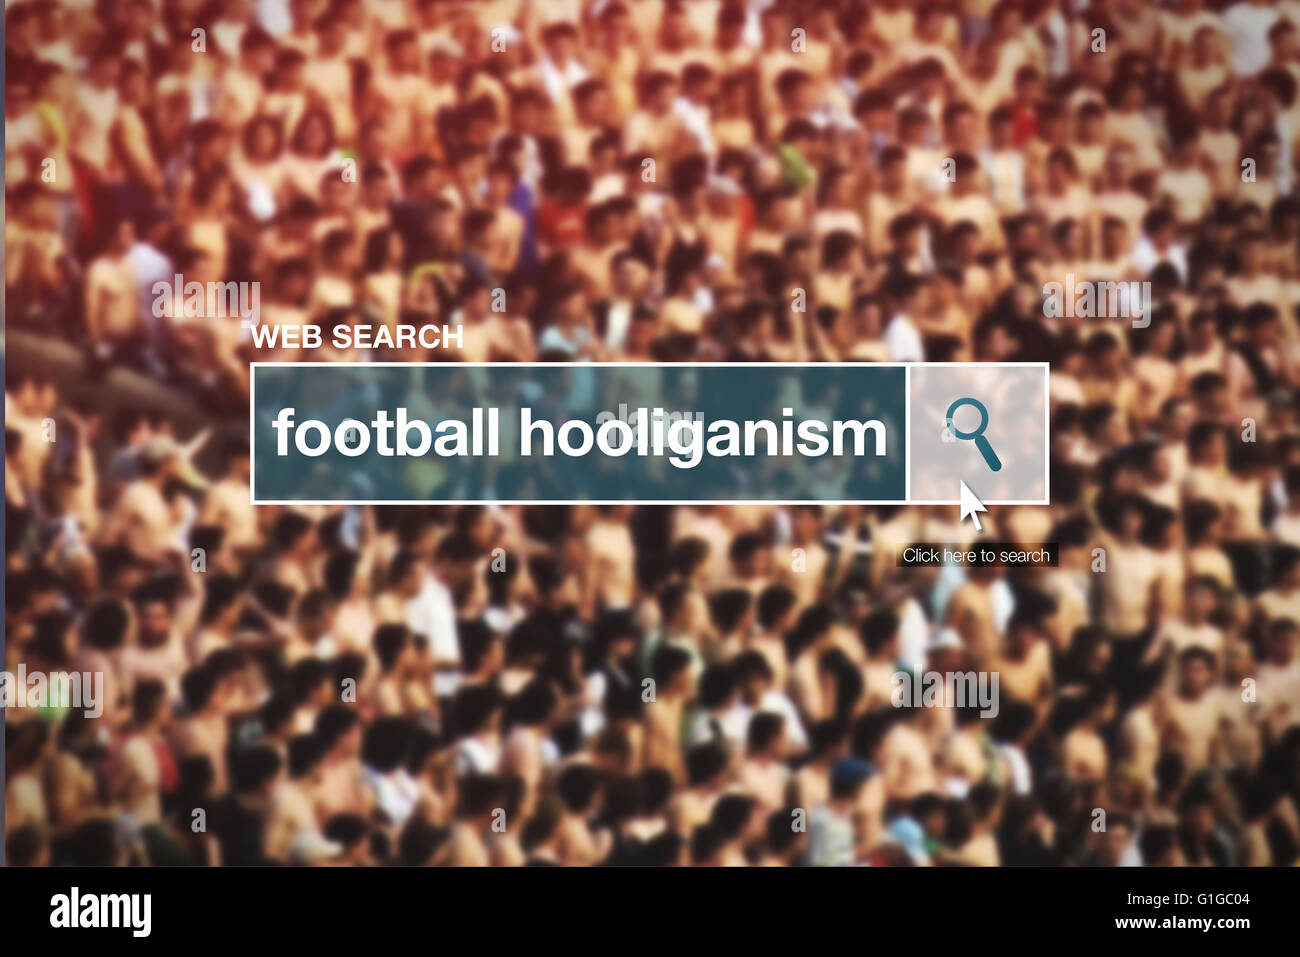 Web search bar glossary term - football hooliganism definition in internet glossary. Stock Photo